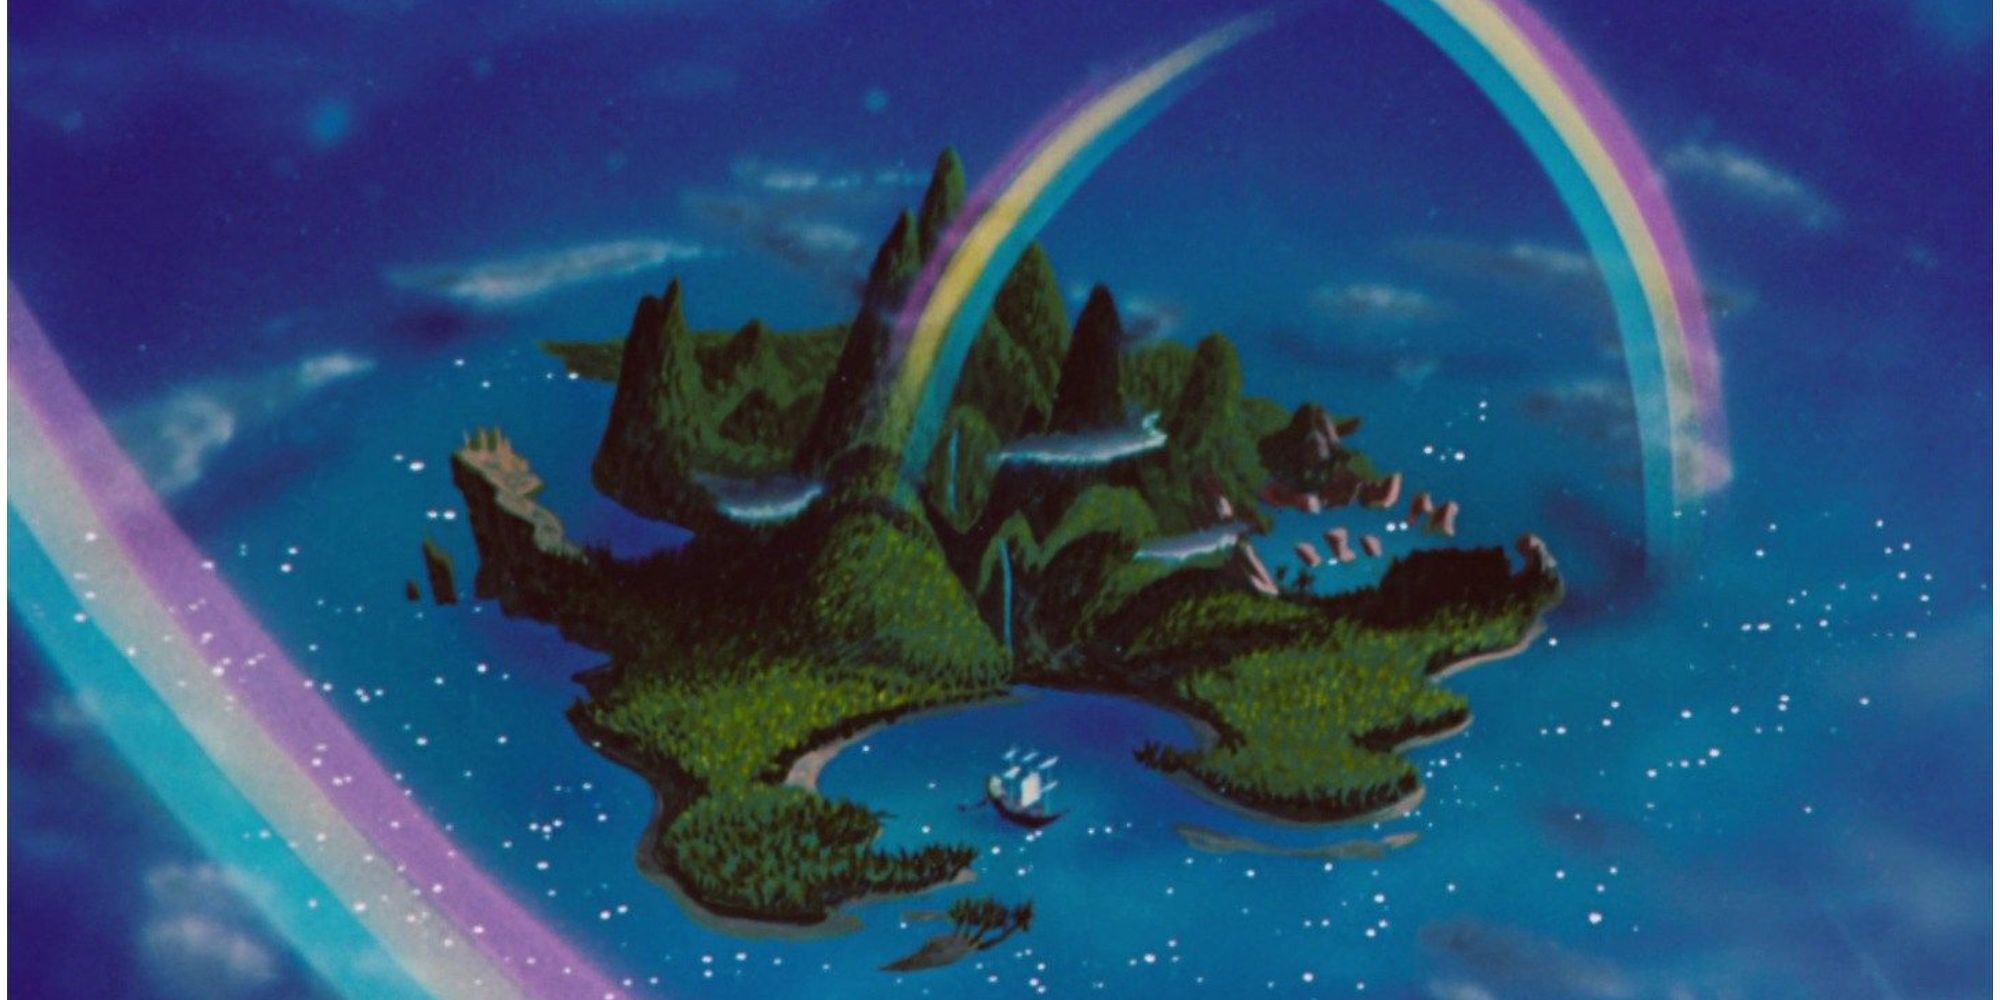 Rainbows reach out over the island of Neverland